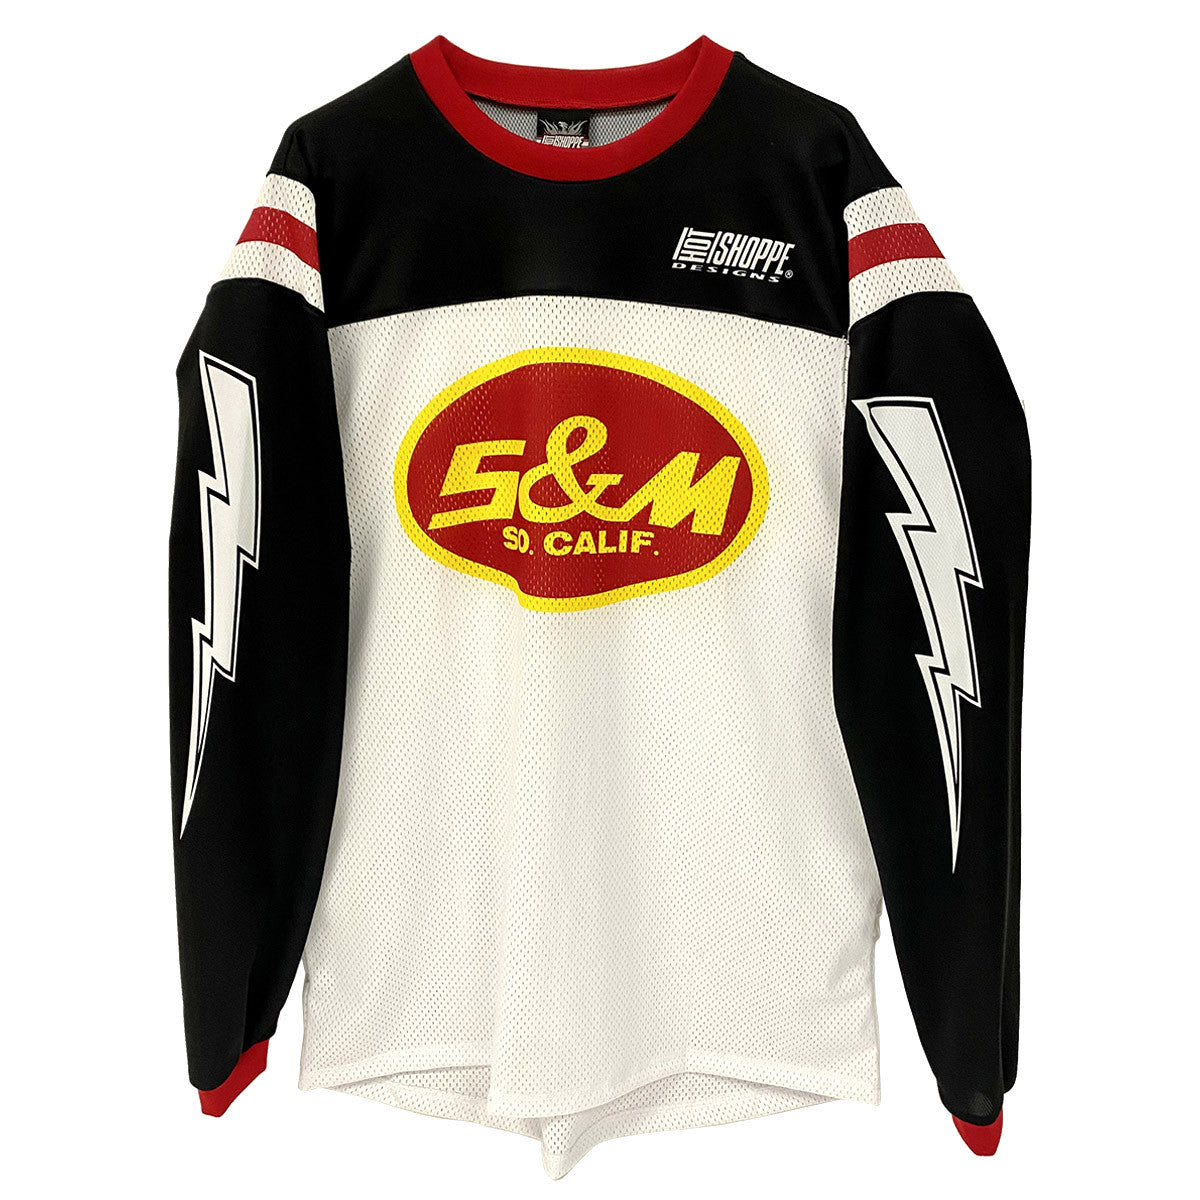 S&M Retro Oval Race Jersey by HotShoppe - Adult 4XL - USA Made